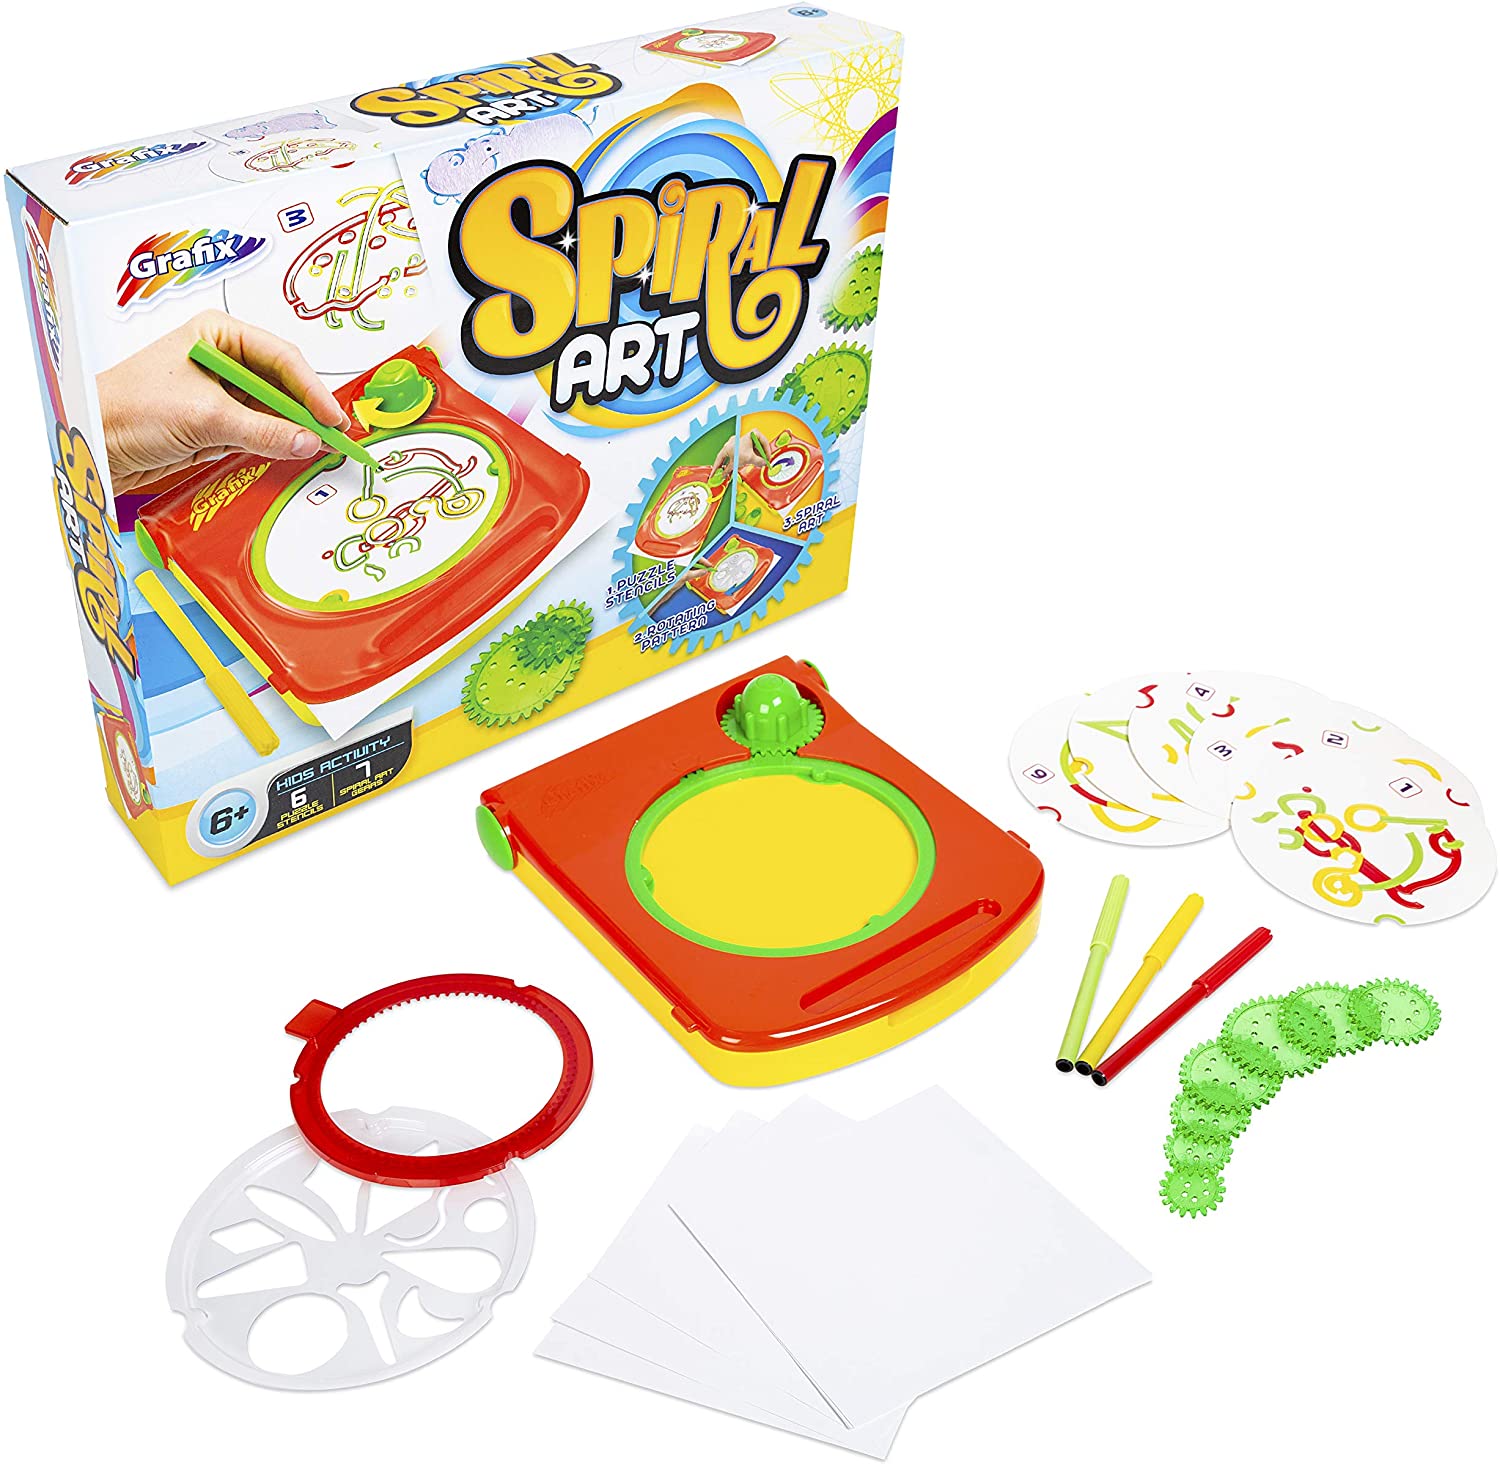 3D Print File Stl, Spirograph Deluxe Set, Drawing Set, Crafts, Painting  Templates, Children's Mosaic, Learning to Draw 